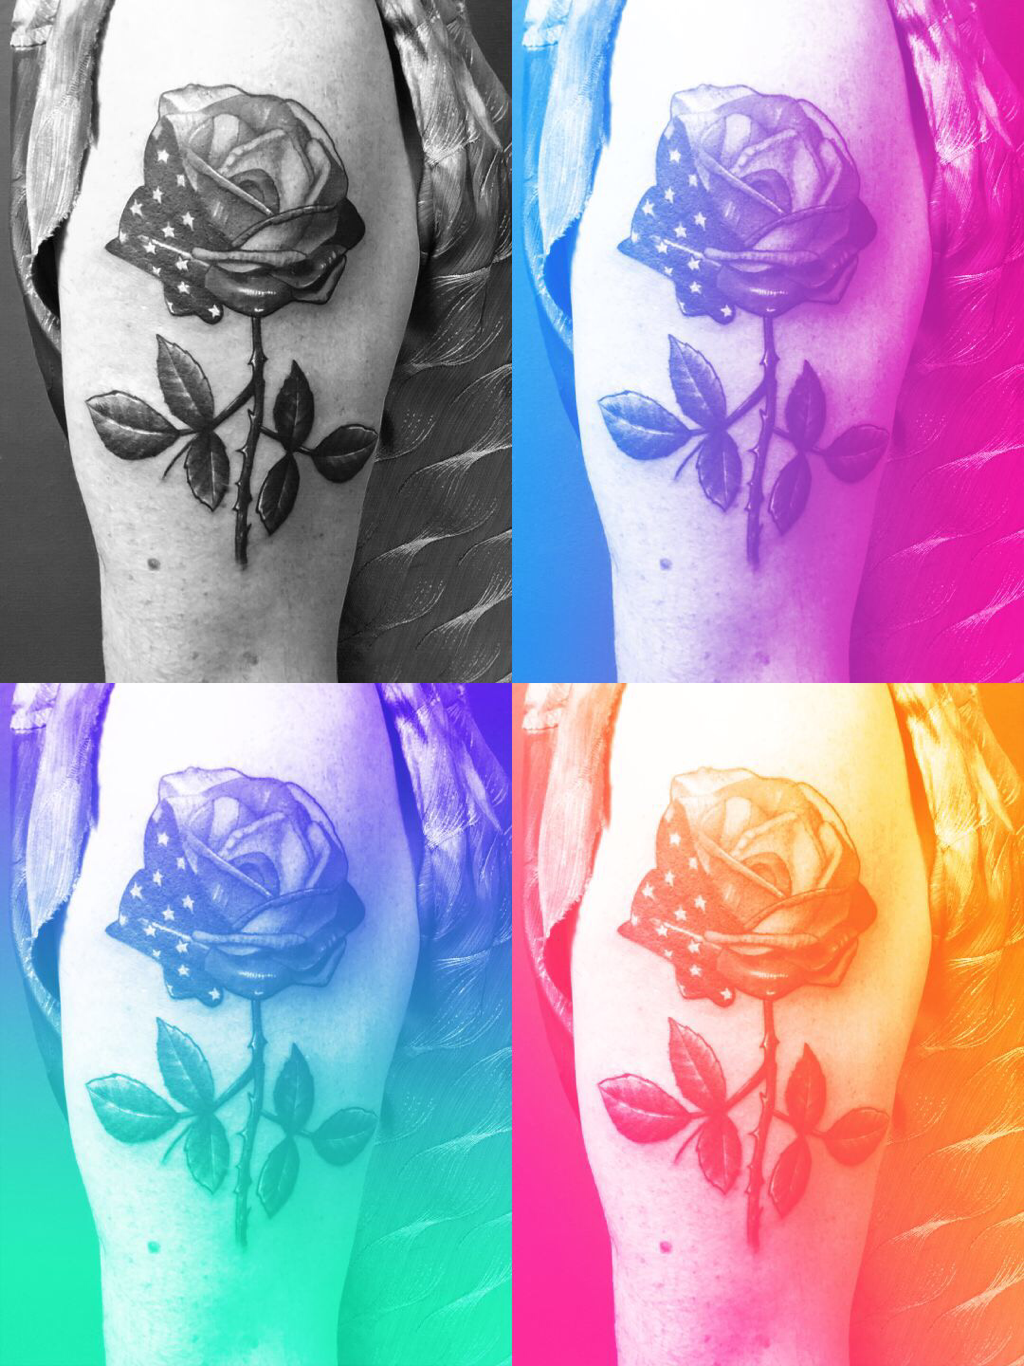 Trans And Gender-Nonconforming People Share The Stories Behind Their Tattoos